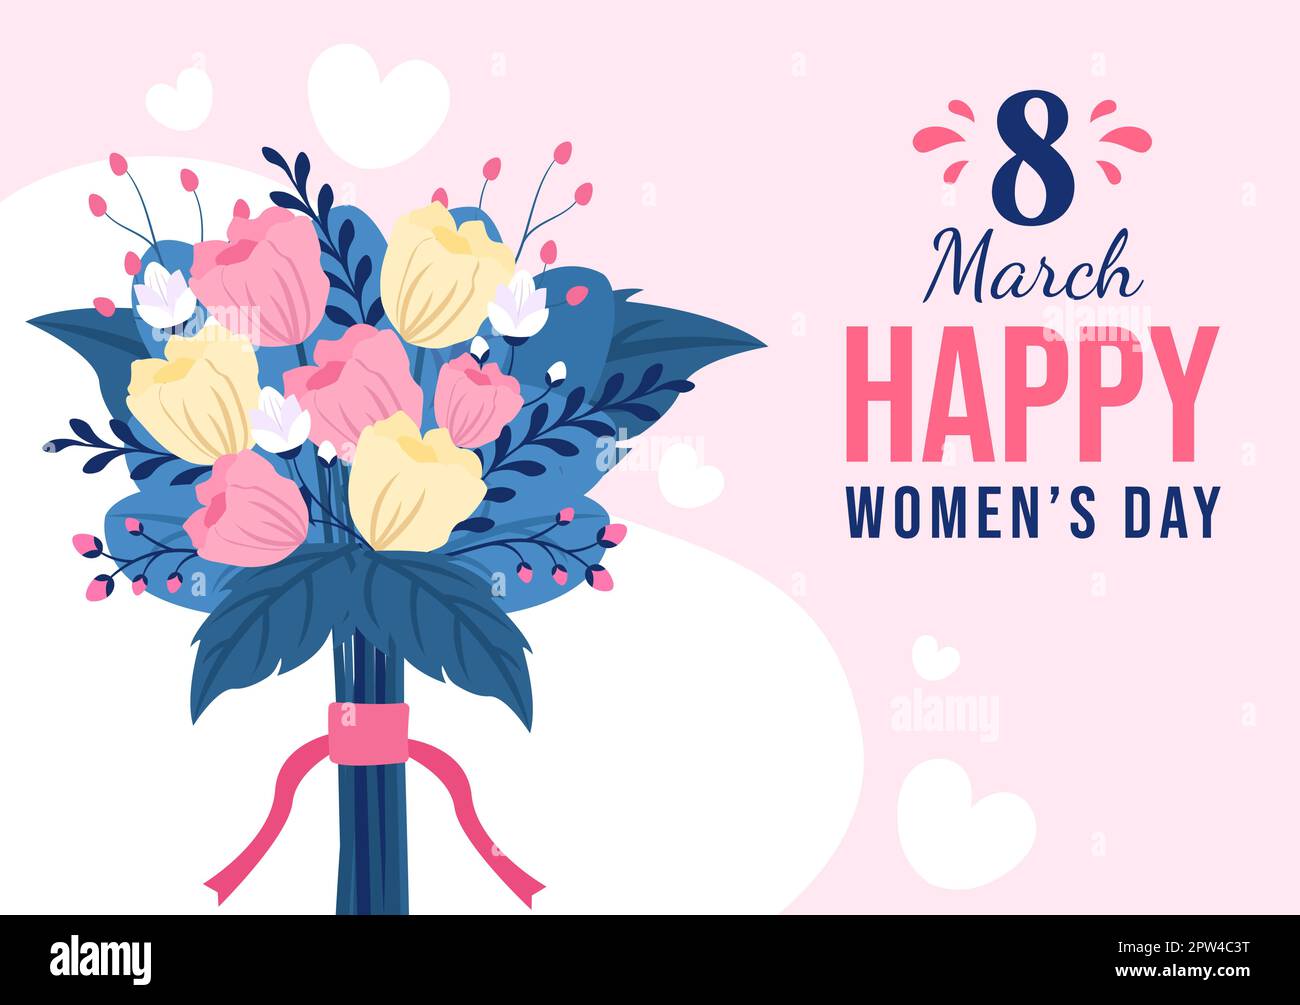 International Women's Day on March 8 Illustration to Celebrate the Achievements of Women in Flat Cartoon Hand Drawn Landing Page Templates Stock Vector